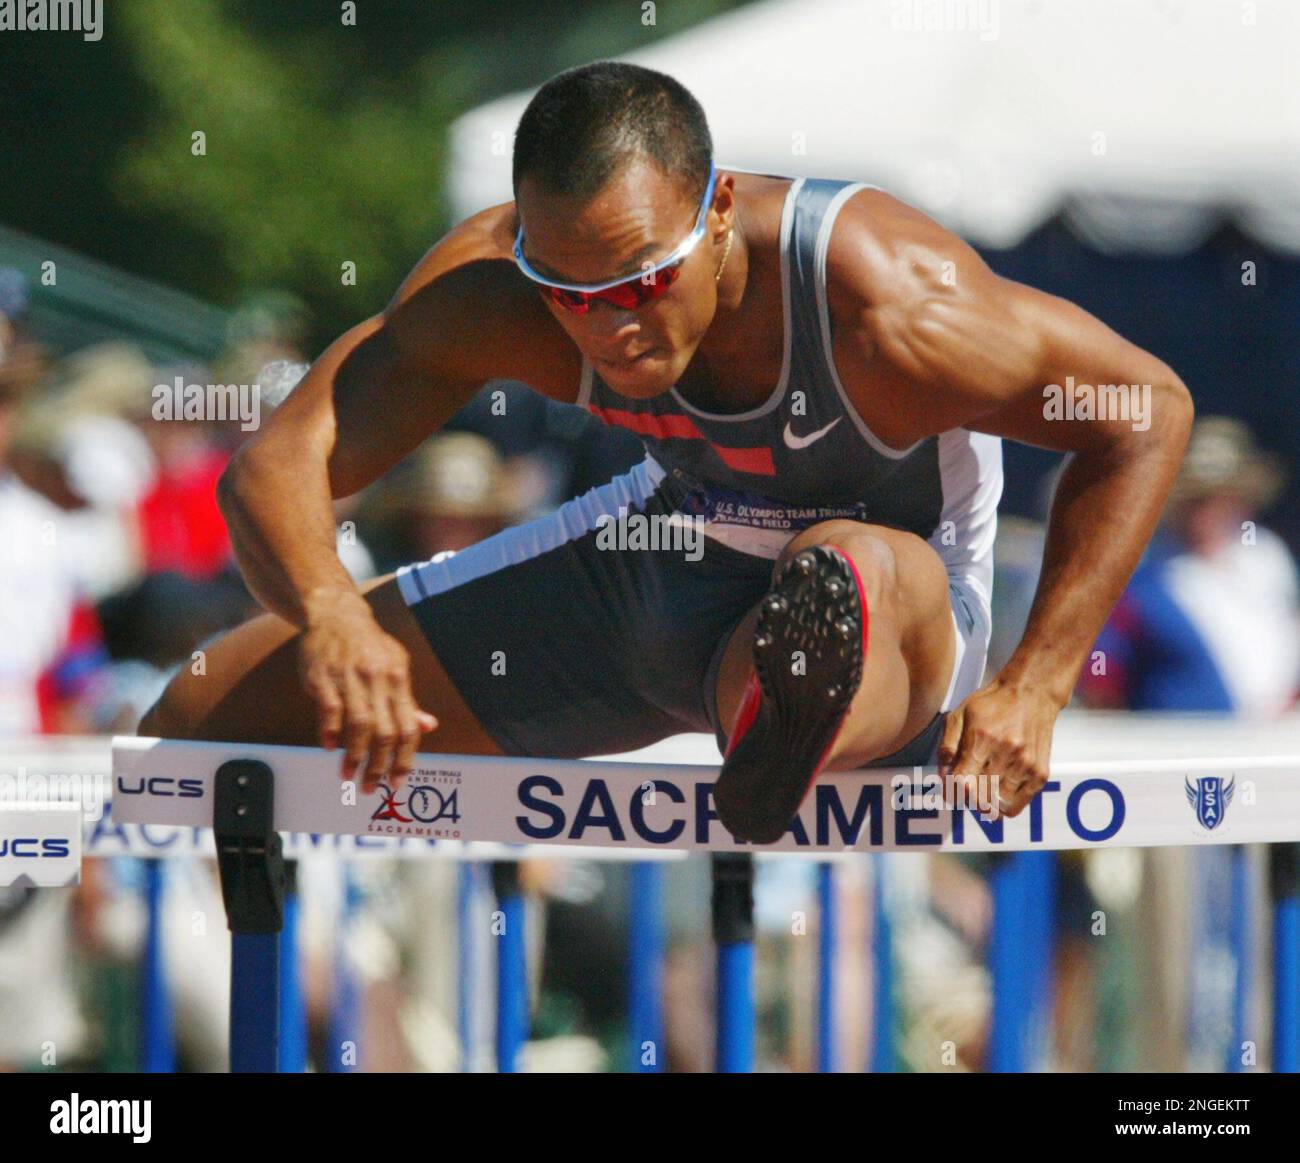 Bryan Clay clears a hurdle during the men's decathlon 110-meter hurdles at  the U.S. Olympic track and field trials in Sacramento, Calif., Saturday,  July 17, 2004. (AP Photo/Rusty Kennedy Stock Photo - Alamy